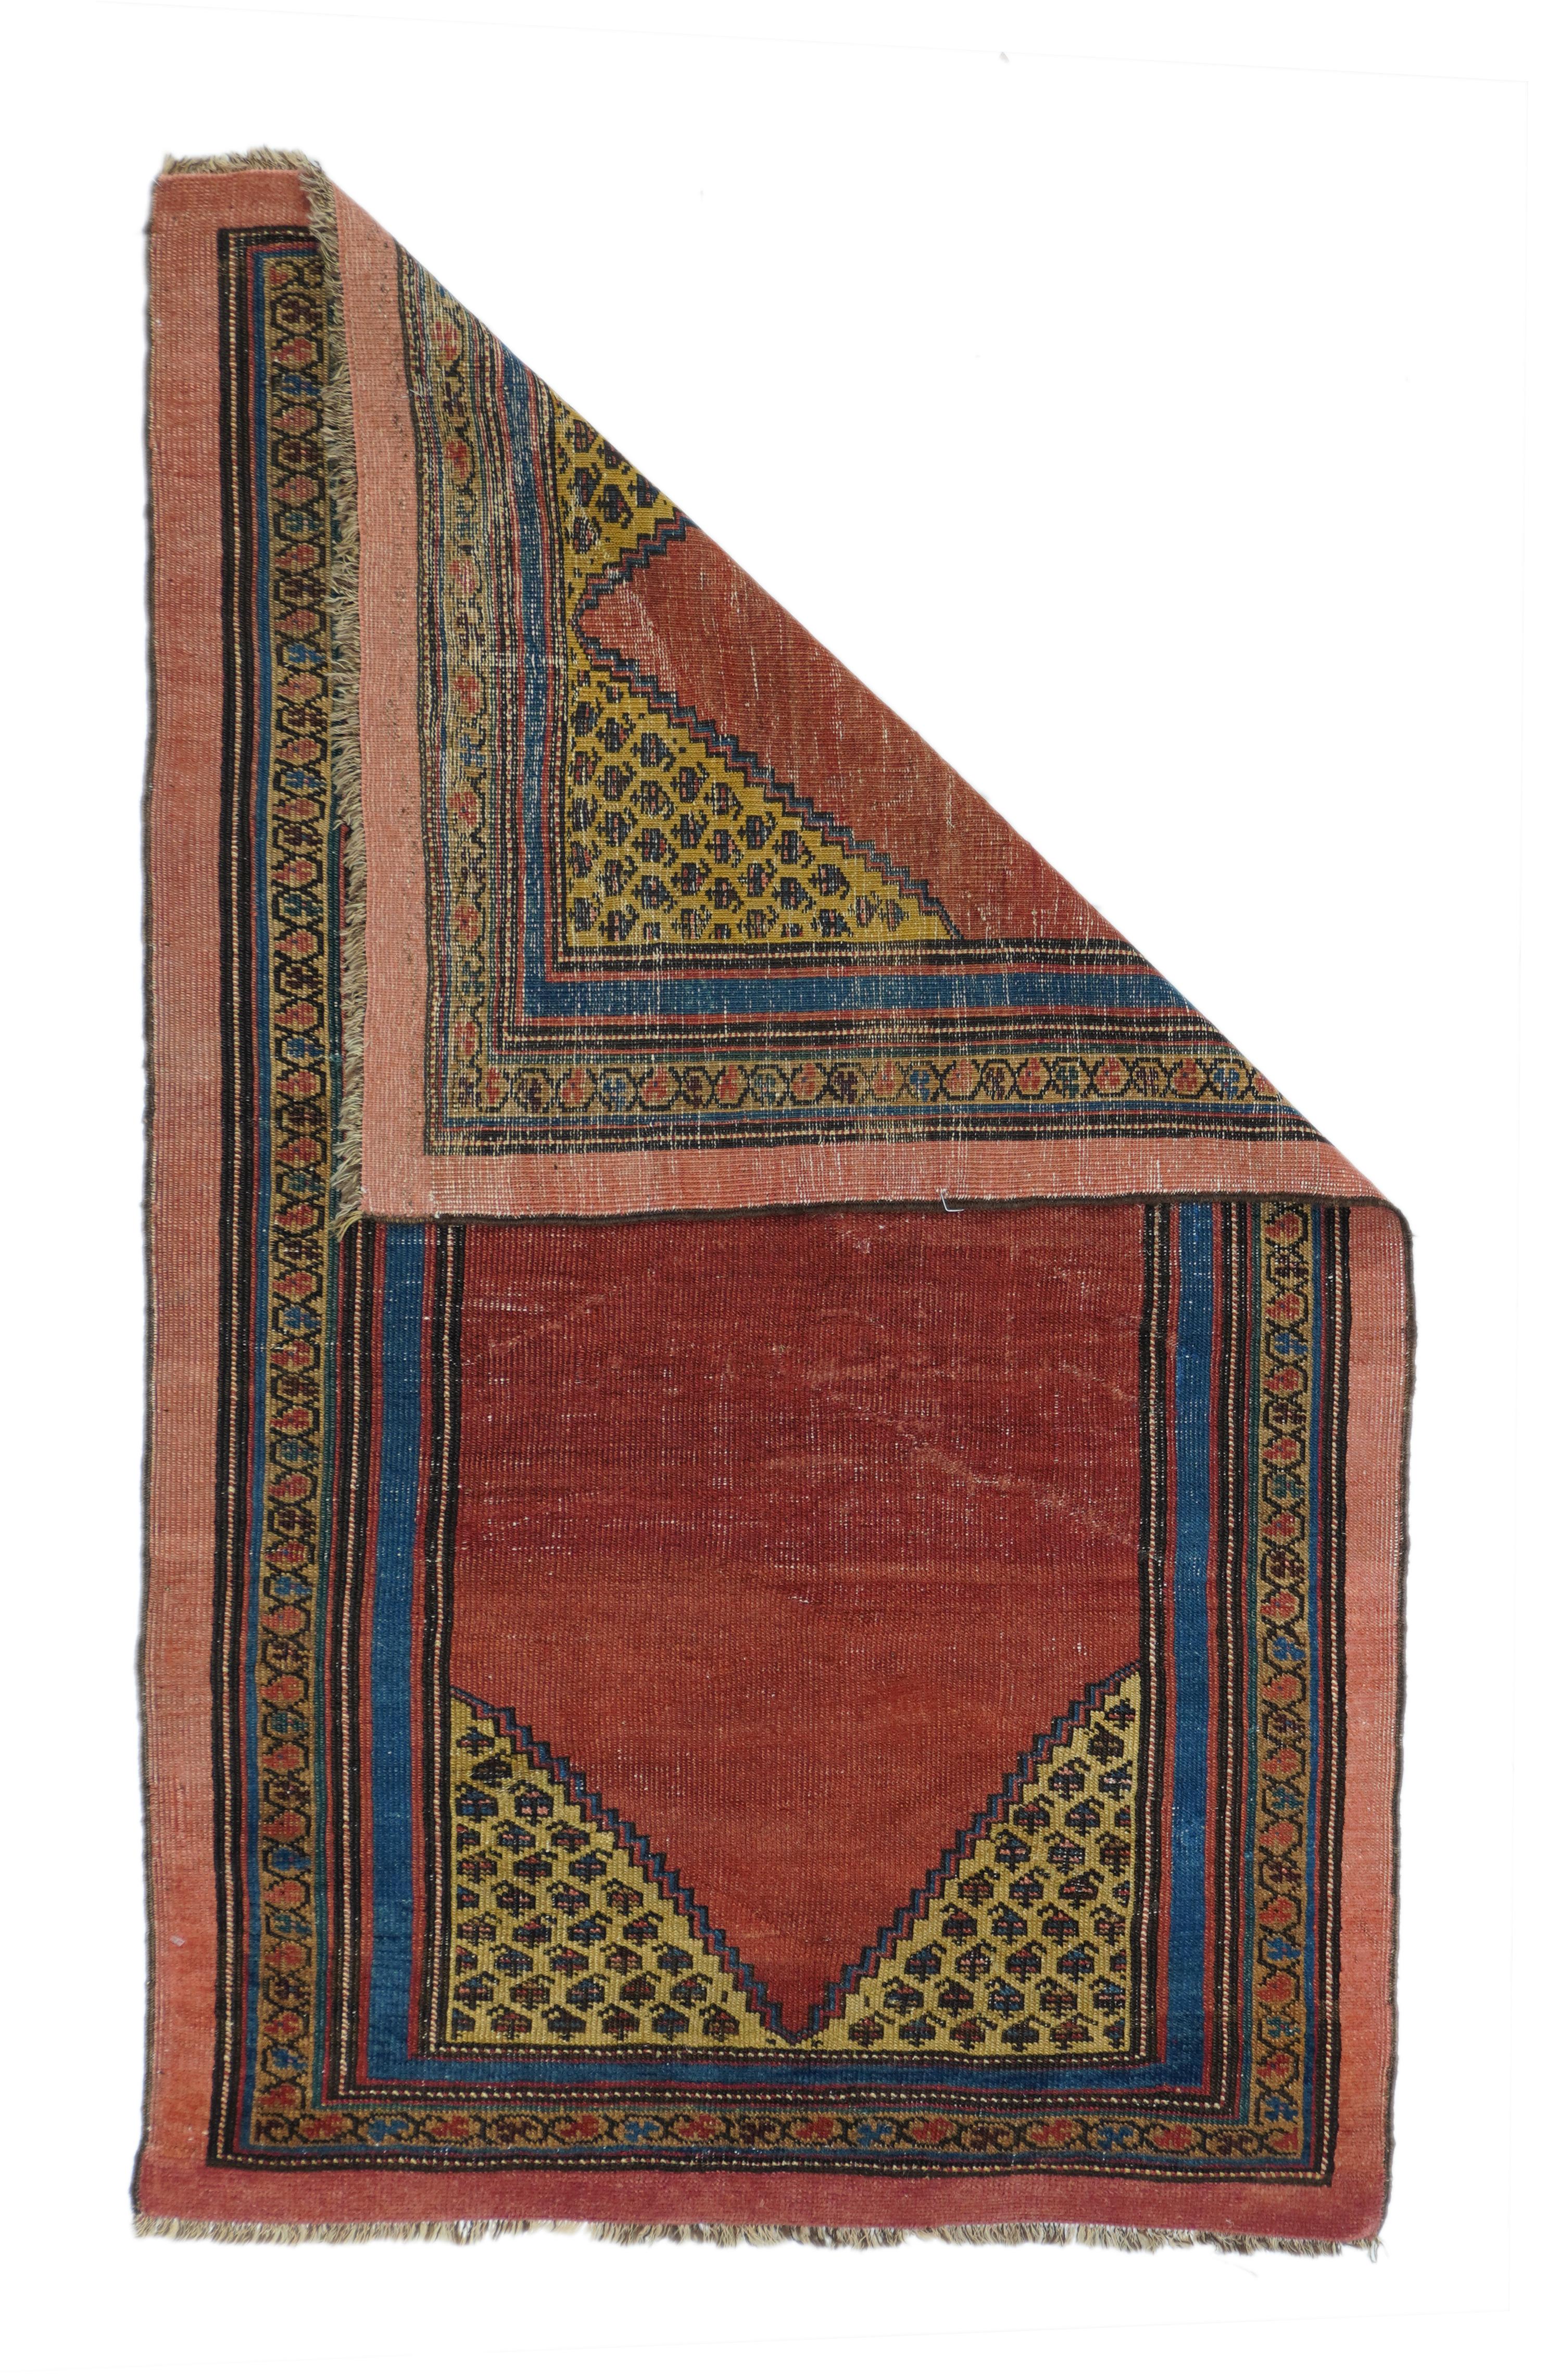 An attractive example of a relatively small production of plain field scatters, on wool or cotton, from the Heriz district around 1900. Madder red plain field with pointed ends and straw boteh corners. Plain blue inner stripe and camel-straw border